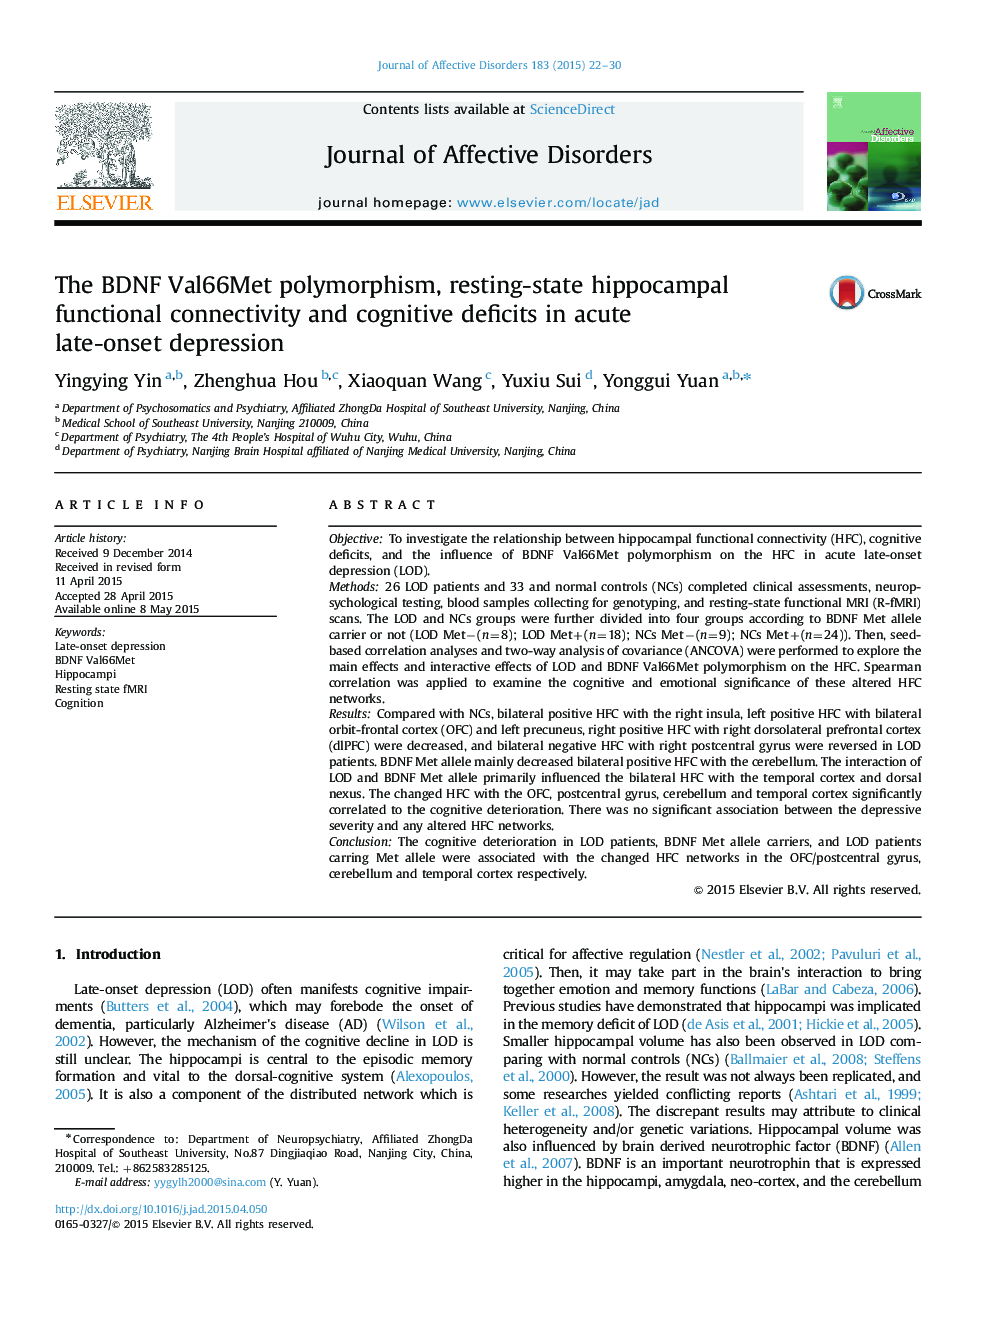 The BDNF Val66Met polymorphism, resting-state hippocampal functional connectivity and cognitive deficits in acute late-onset depression